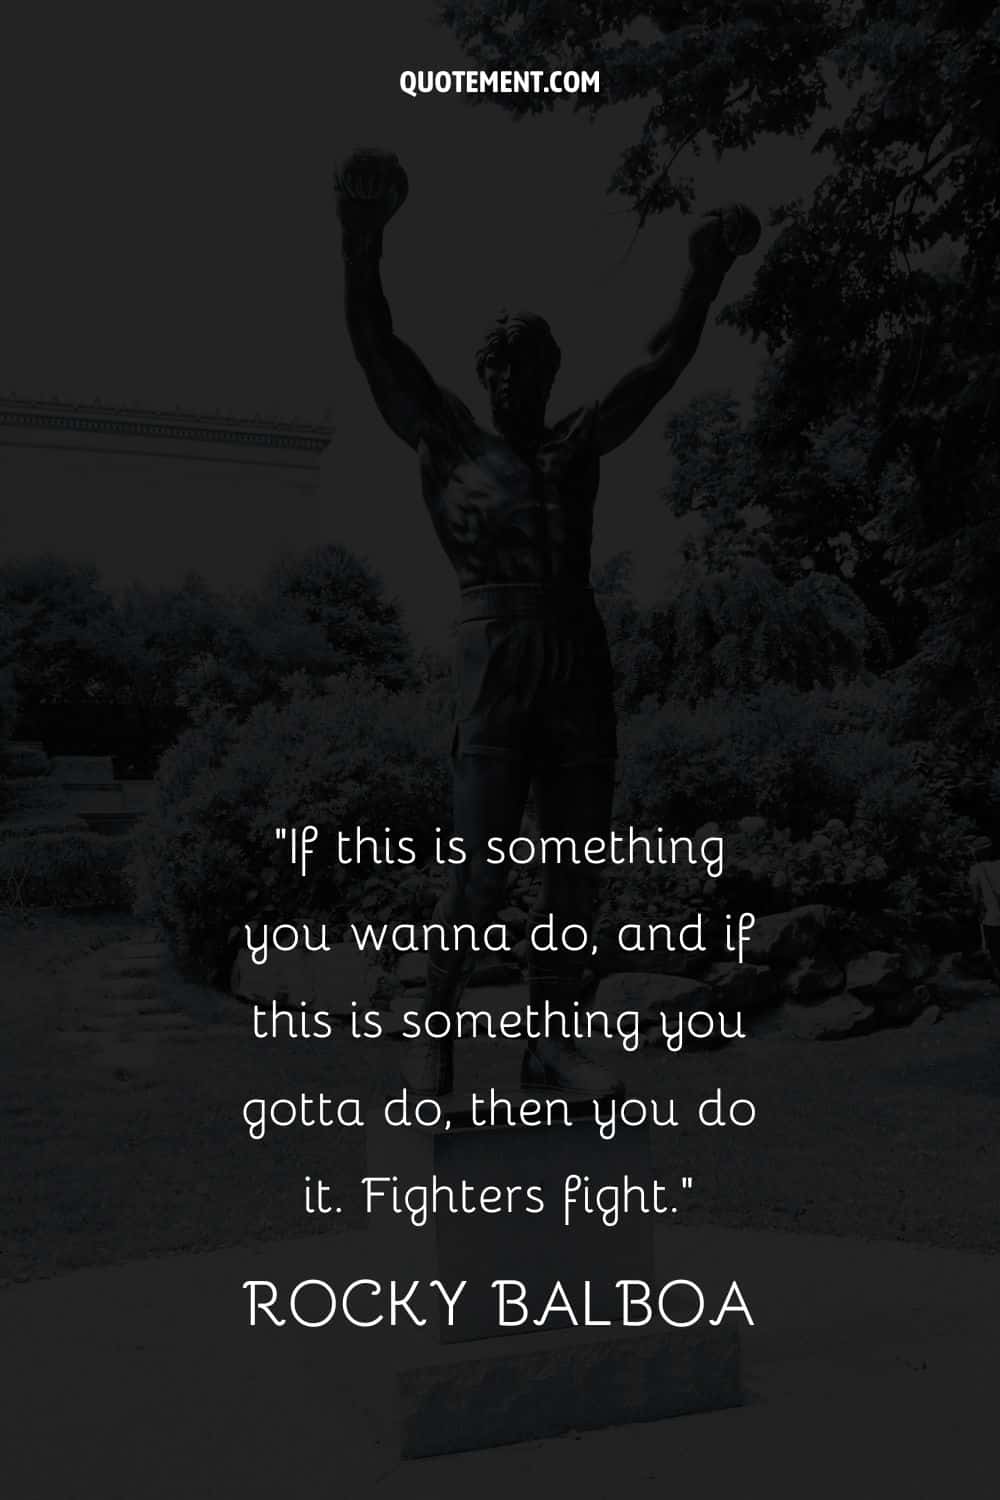 If this is something you wanna do, and if this is something you gotta do, then you do it. Fighters fight